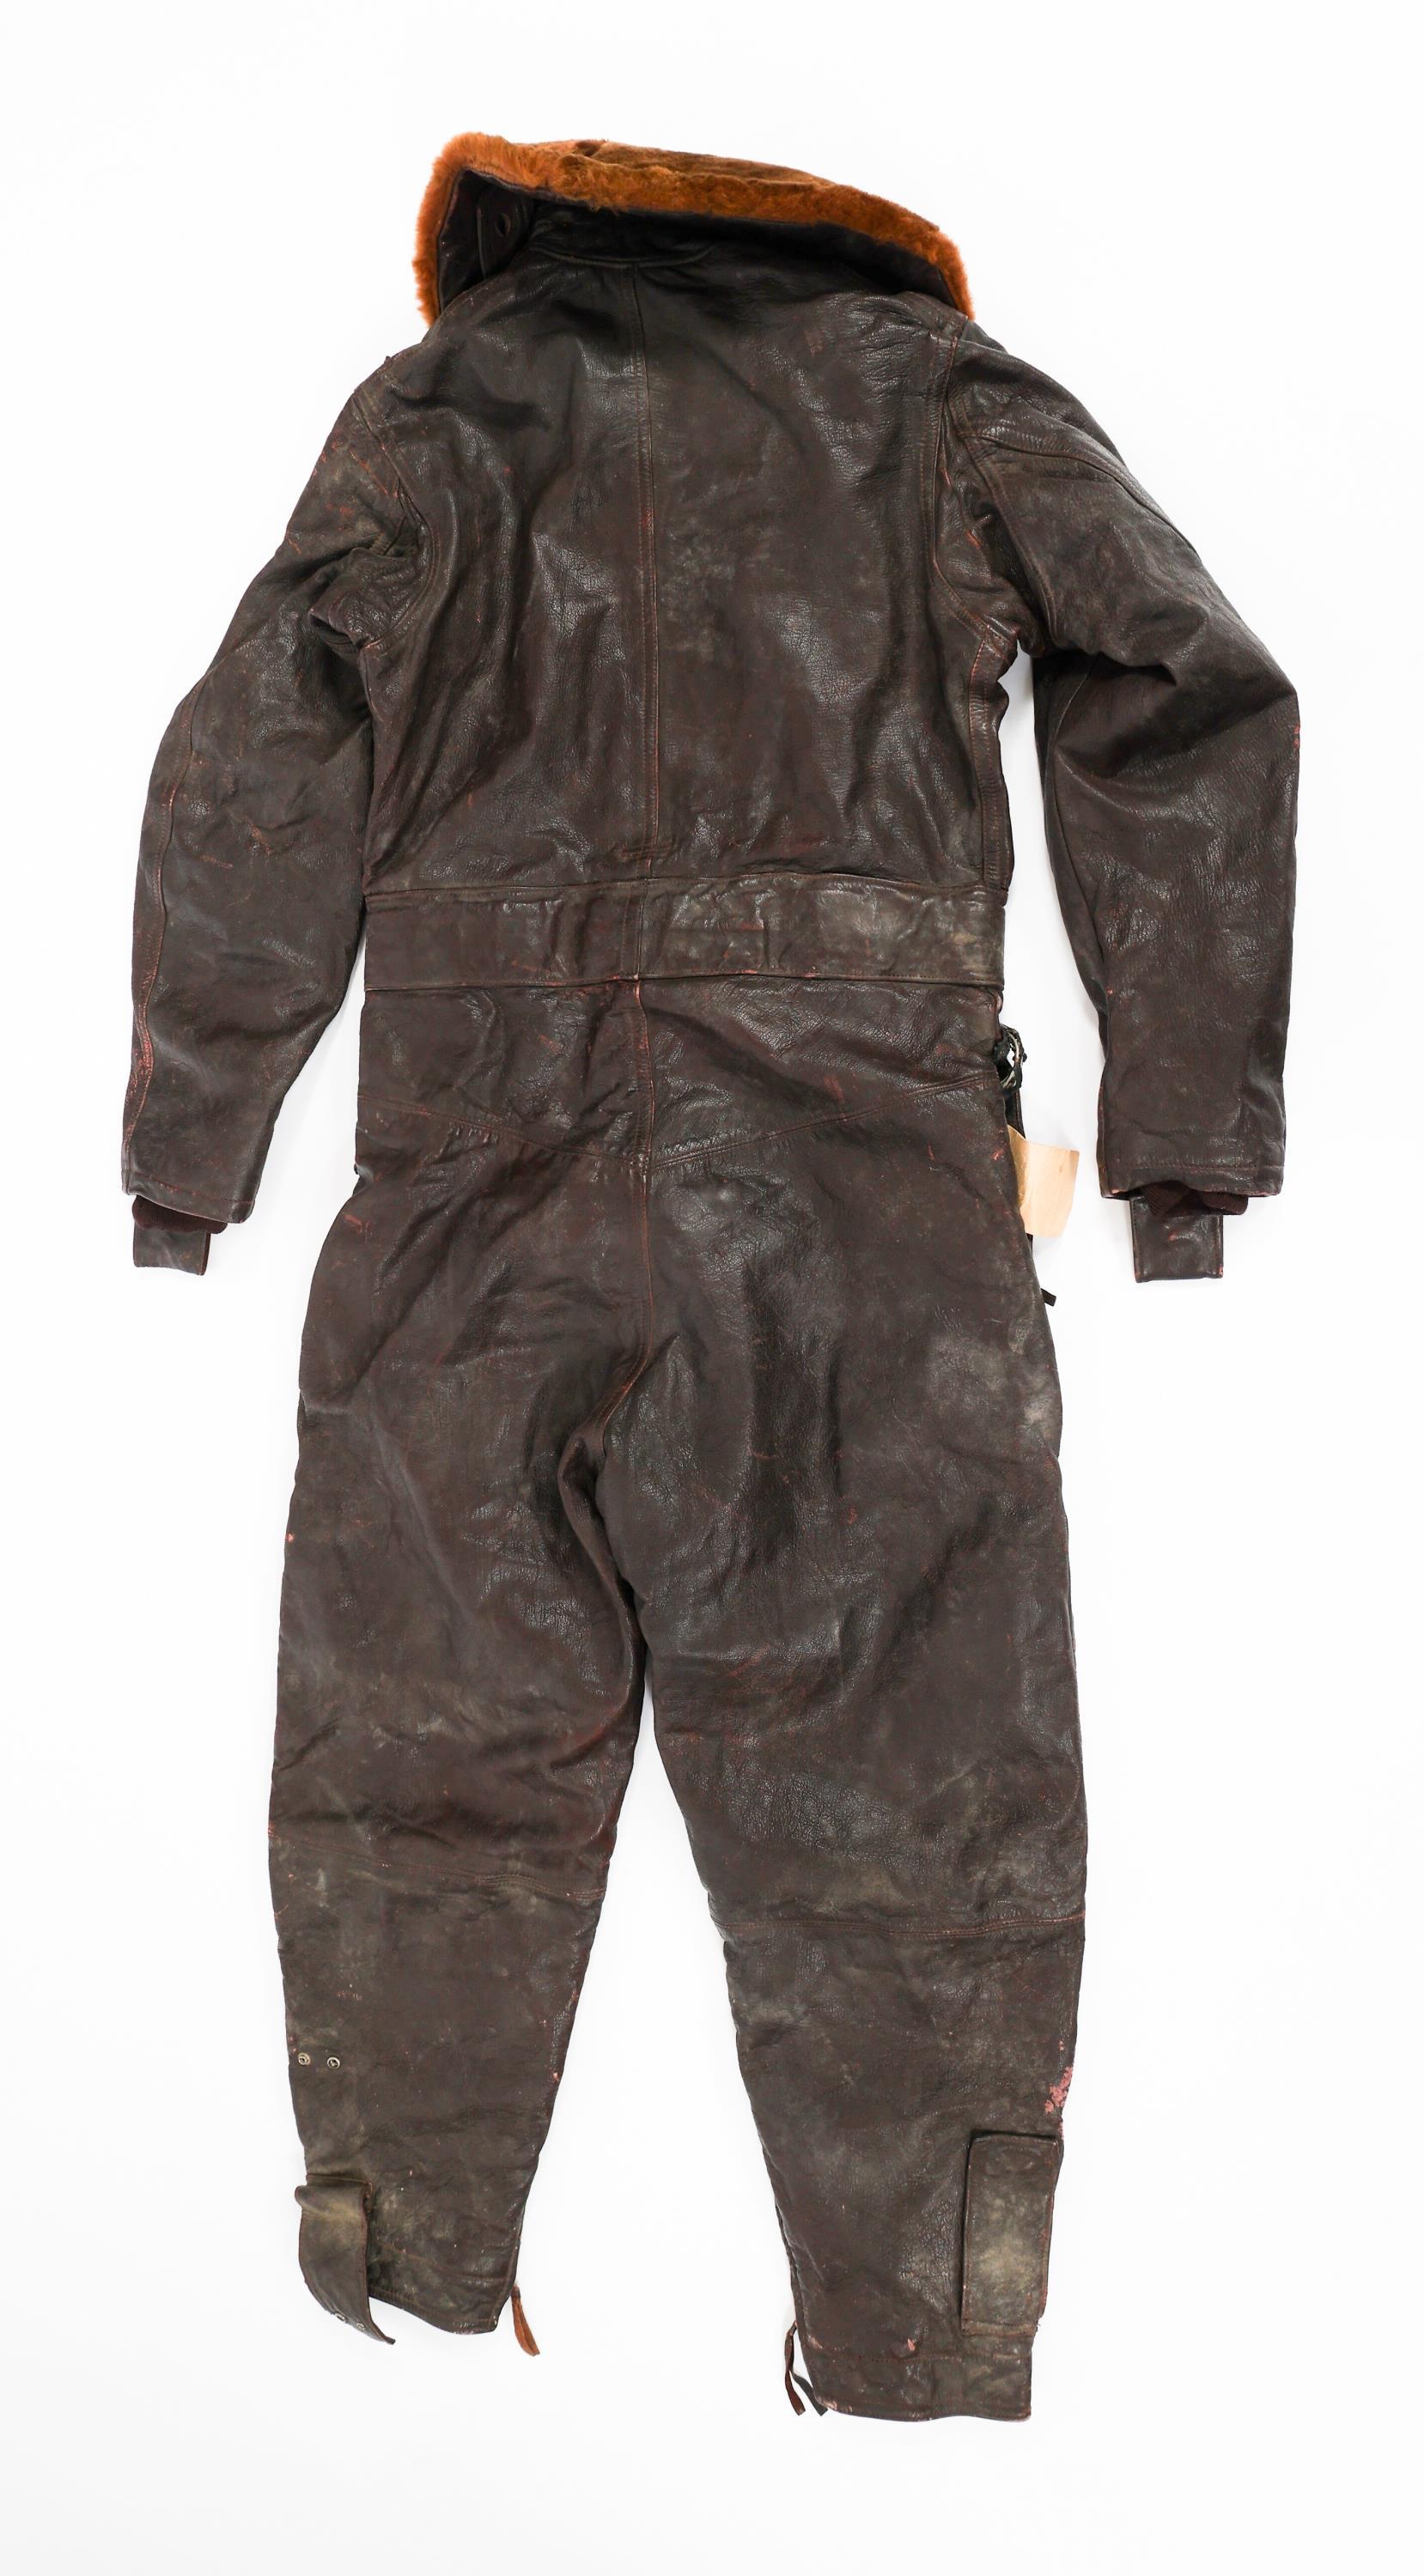 WWII US NAVY CFN-24 HEATED LEATHER FLIGHT SUIT